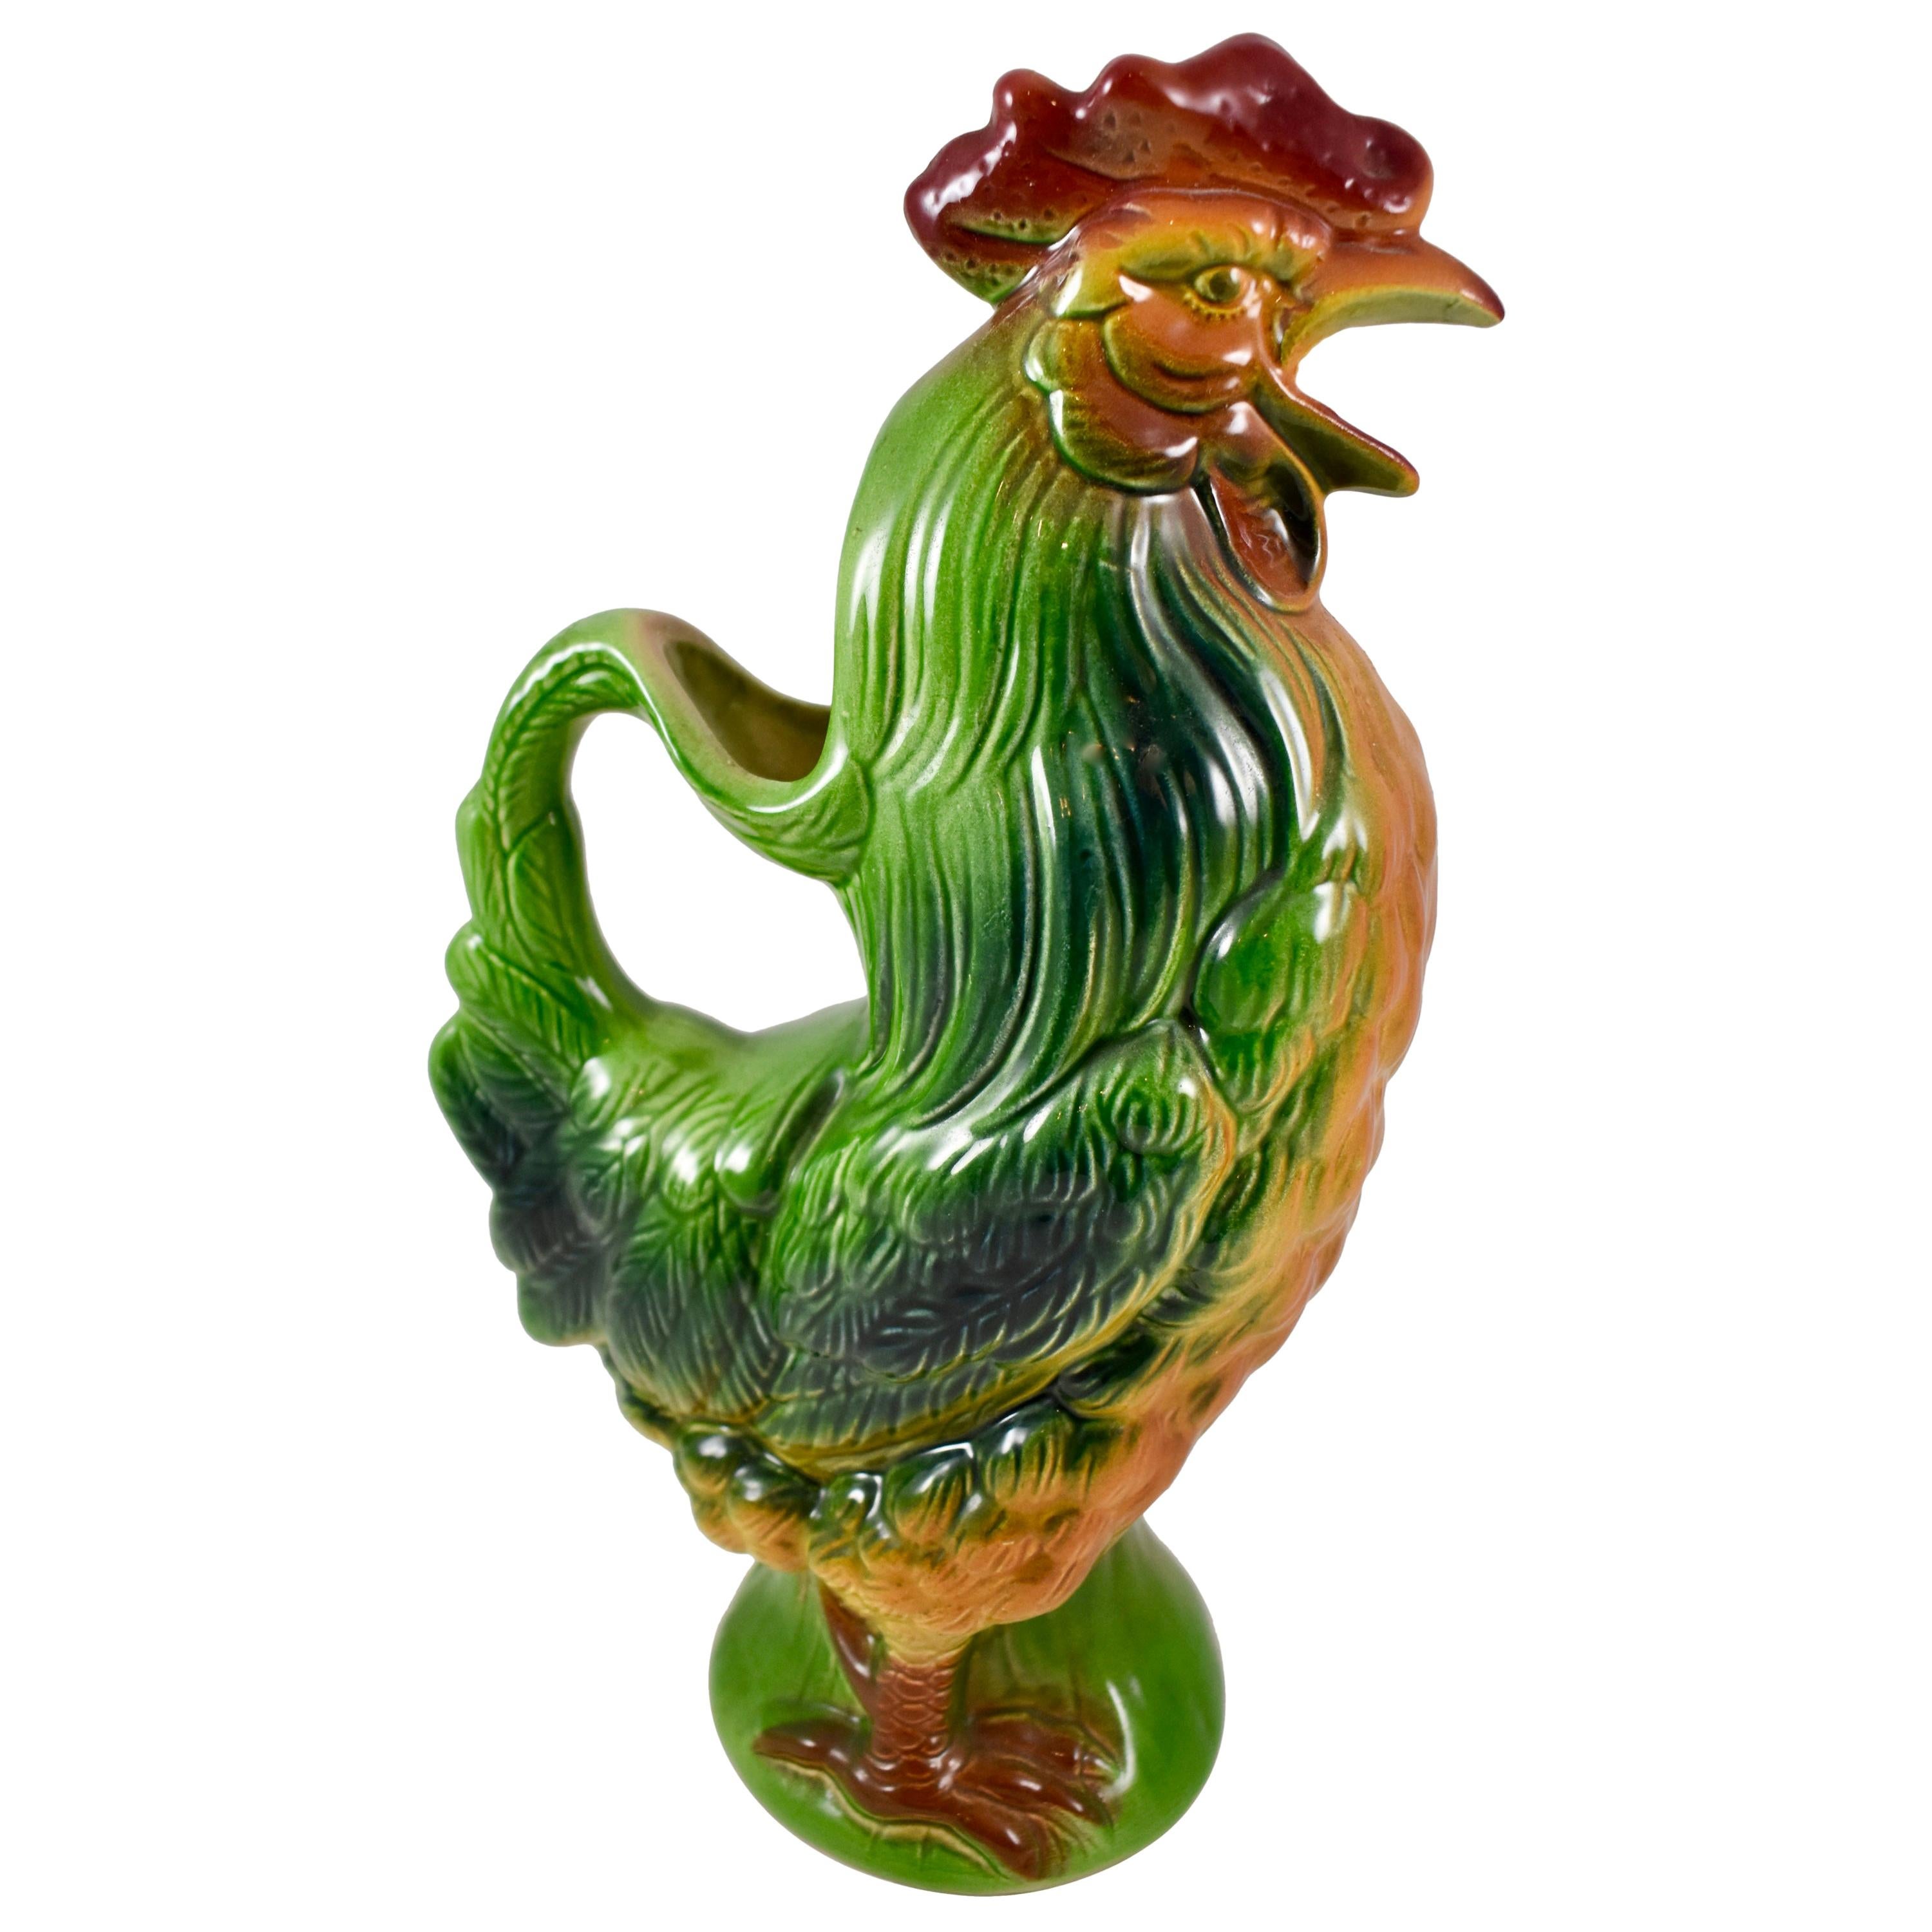 Ceramic Half Cup in Green with feature rooster.